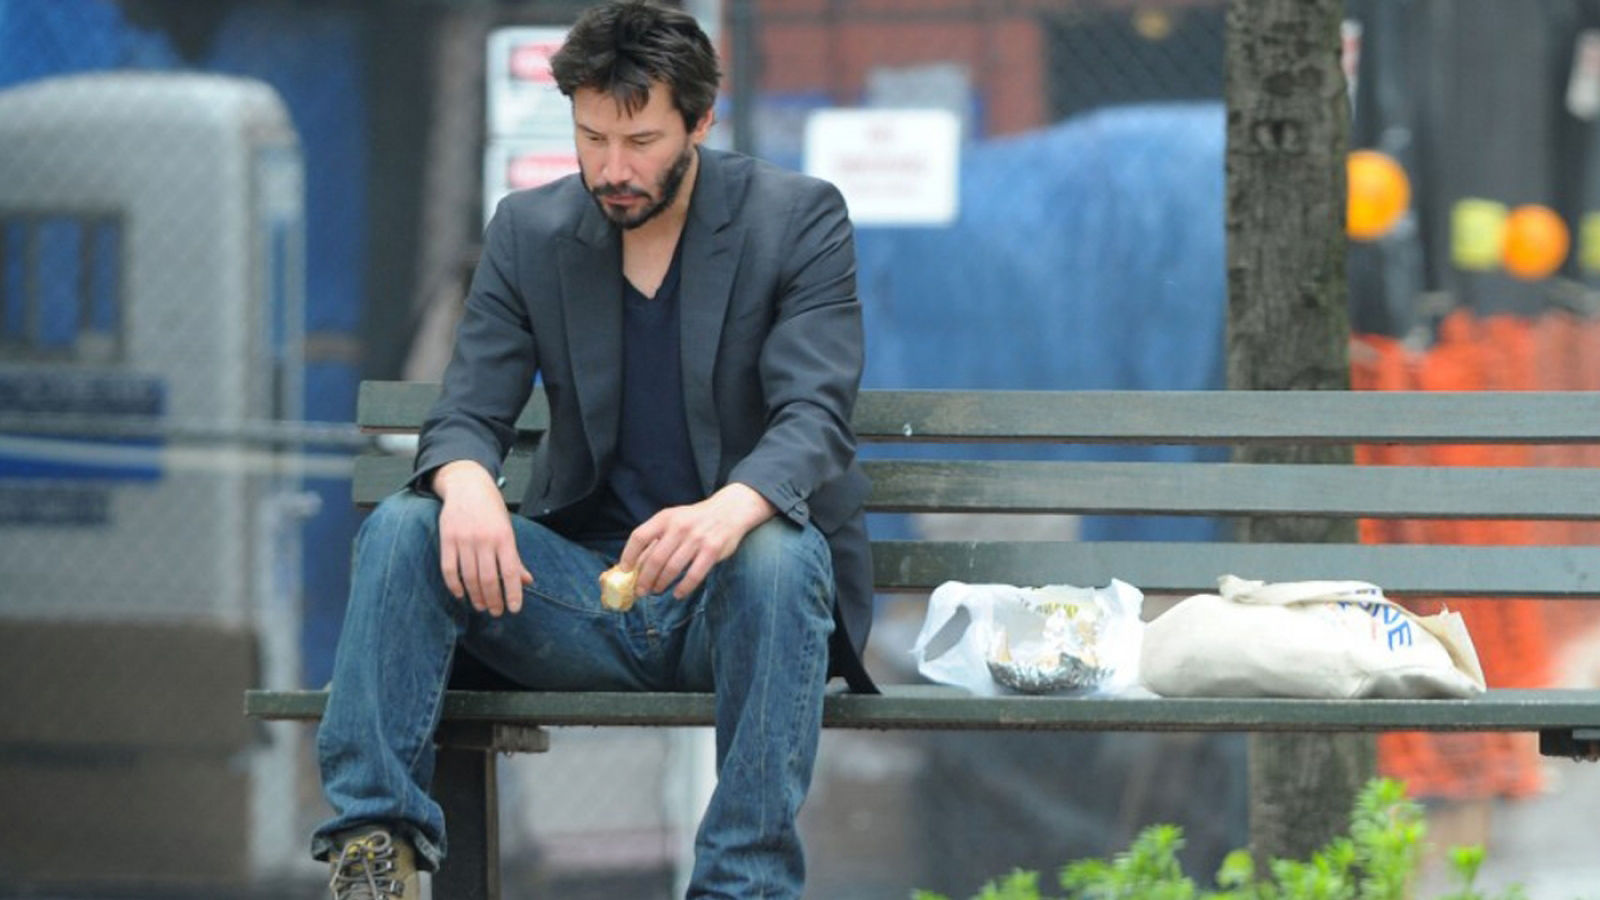 The Heartbreakingly Tragic Story Of Keanu Reeves Revealed